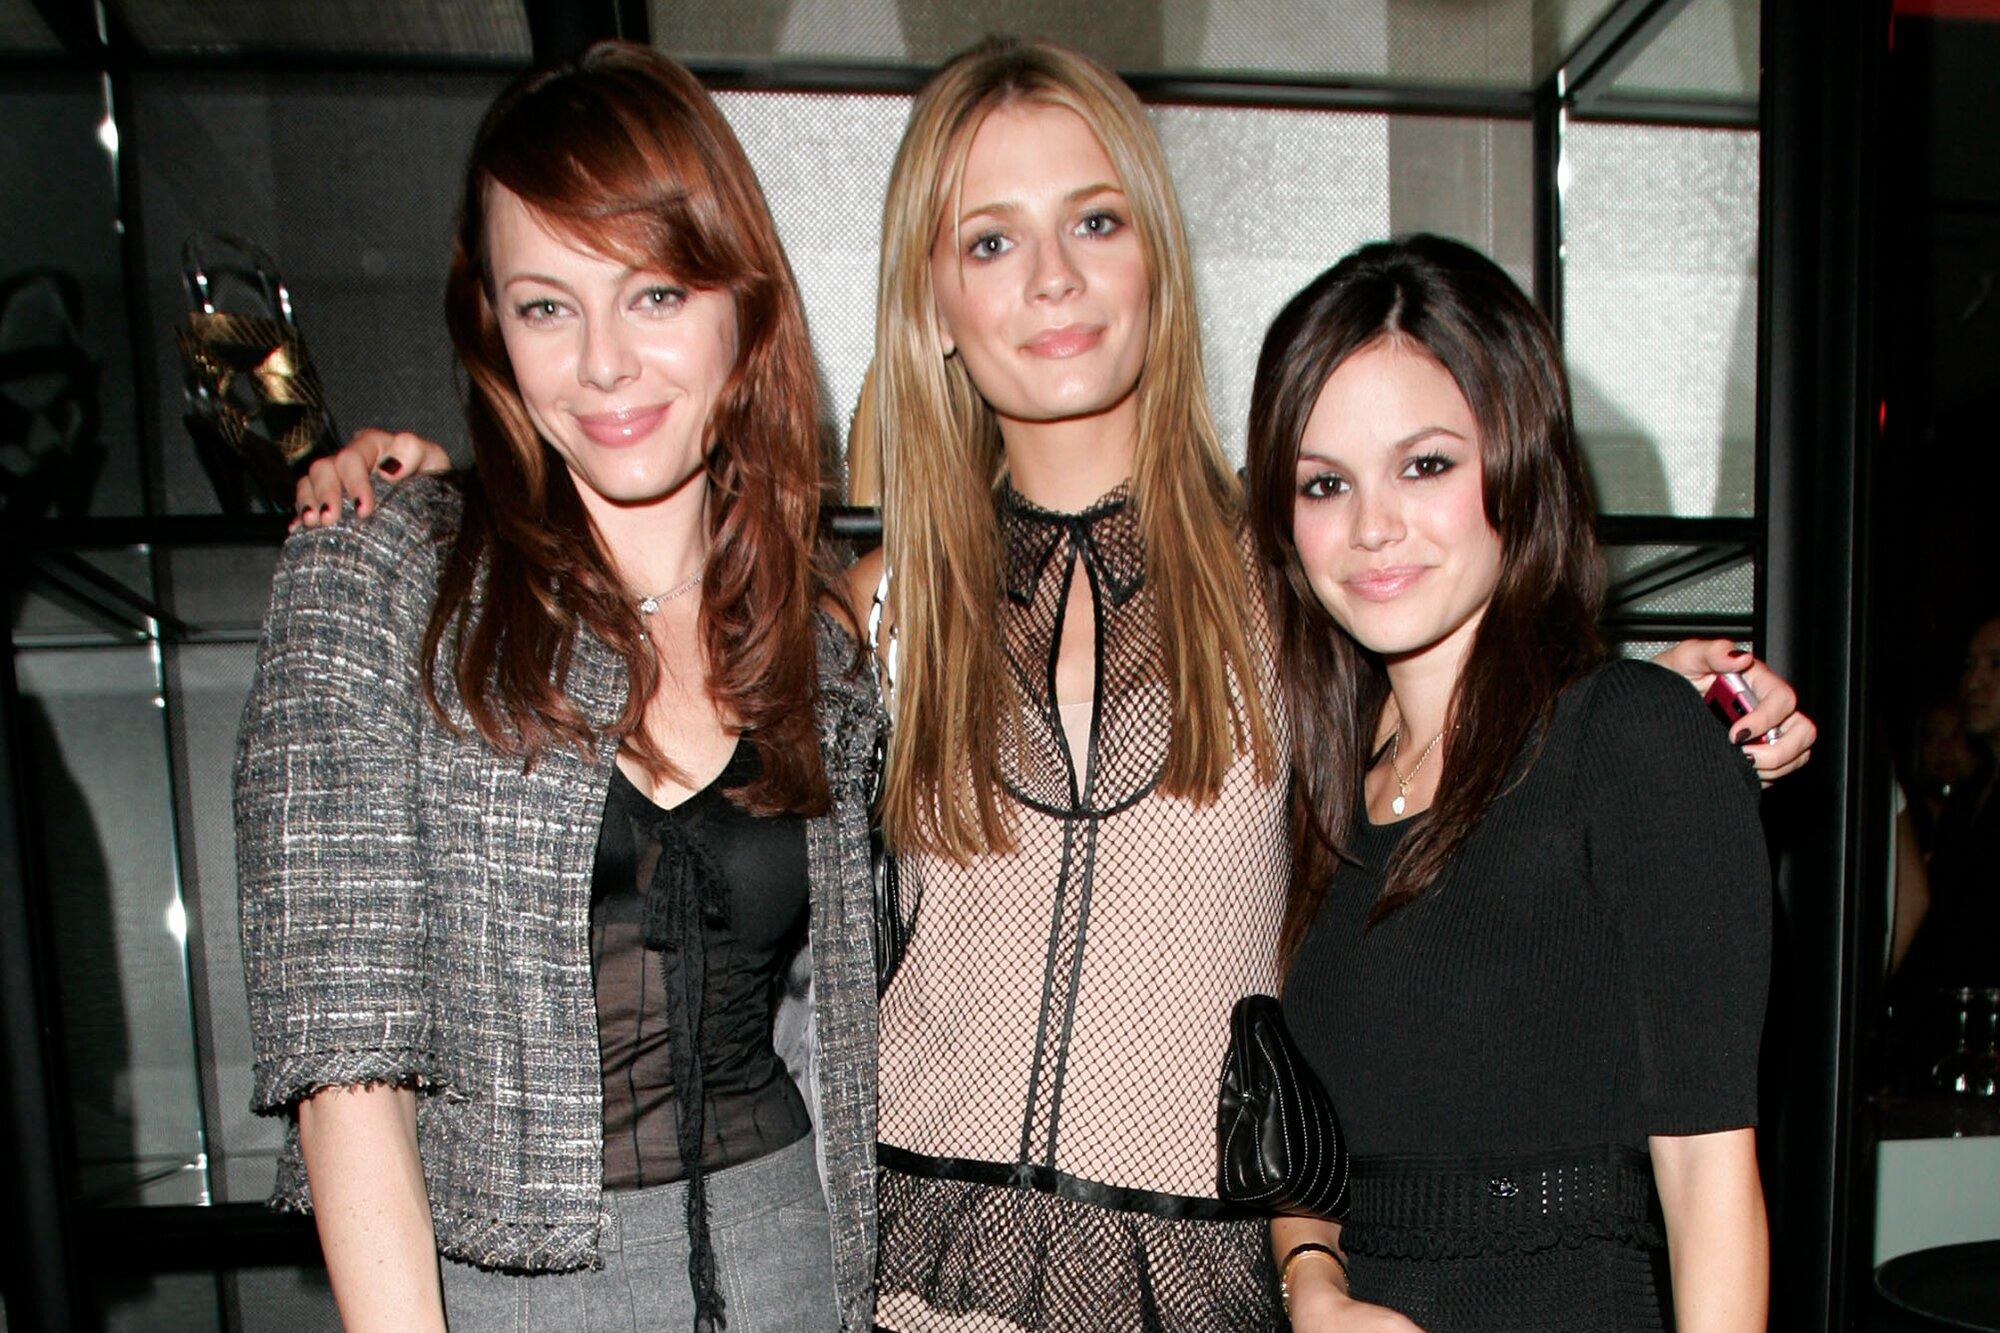 Rachel Bilson and Melinda Clarke respond to Mischa Barton remarks about her experience on The O.C.